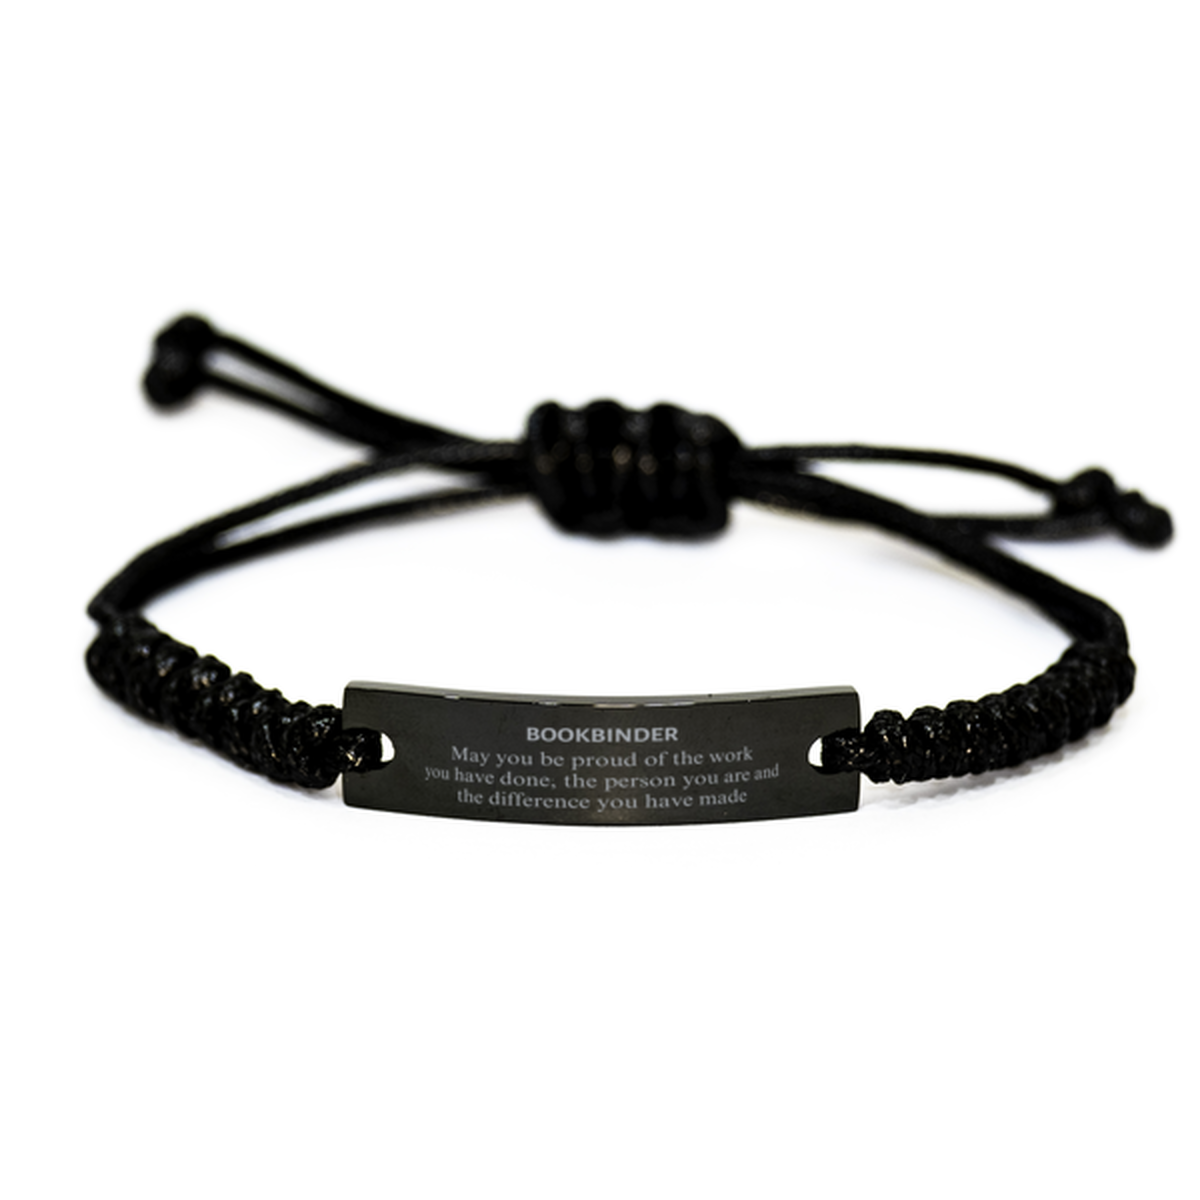 Bookbinder May you be proud of the work you have done, Retirement Bookbinder Black Rope Bracelet for Colleague Appreciation Gifts Amazing for Bookbinder